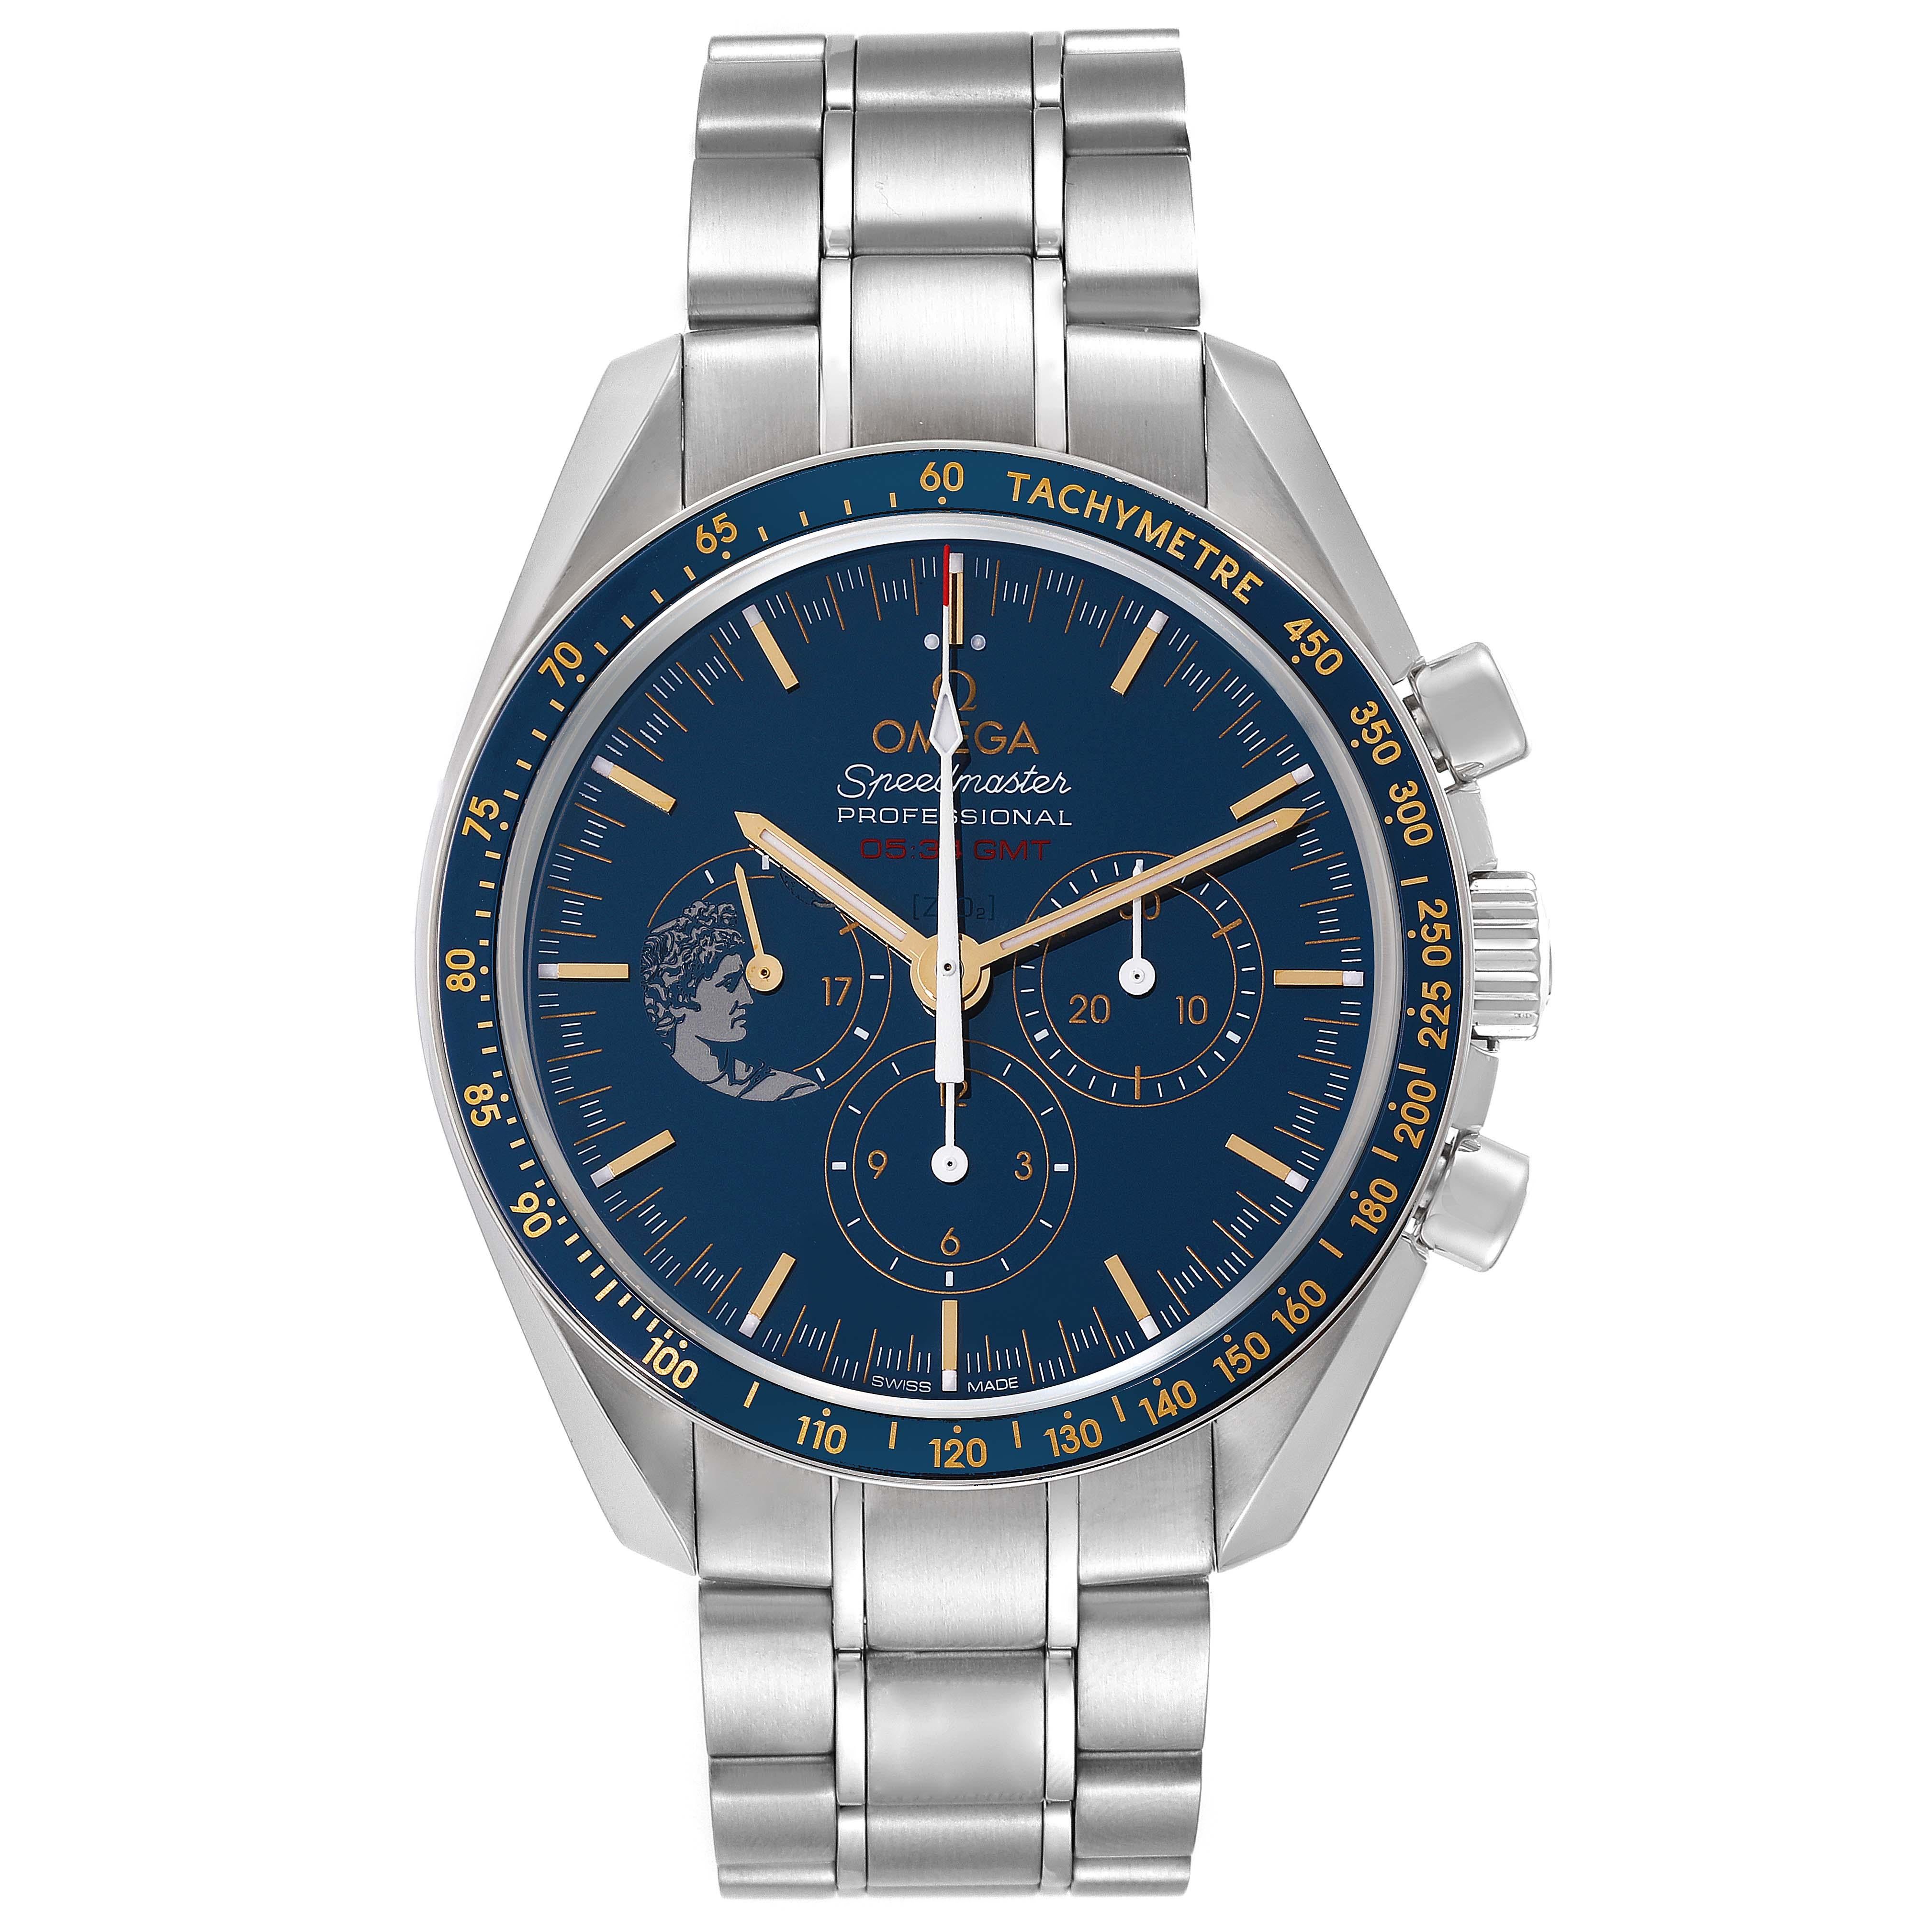 Omega Speedmaster Moonwatch Apollo 17 LE Mens Watch 311.30.42.30.03.001 Card. Manual-winding chronograph movement. Stainless steel round case 42.0 mm in diameter. Case back features a large version of the Apollo 17 mission patch and is engraved with